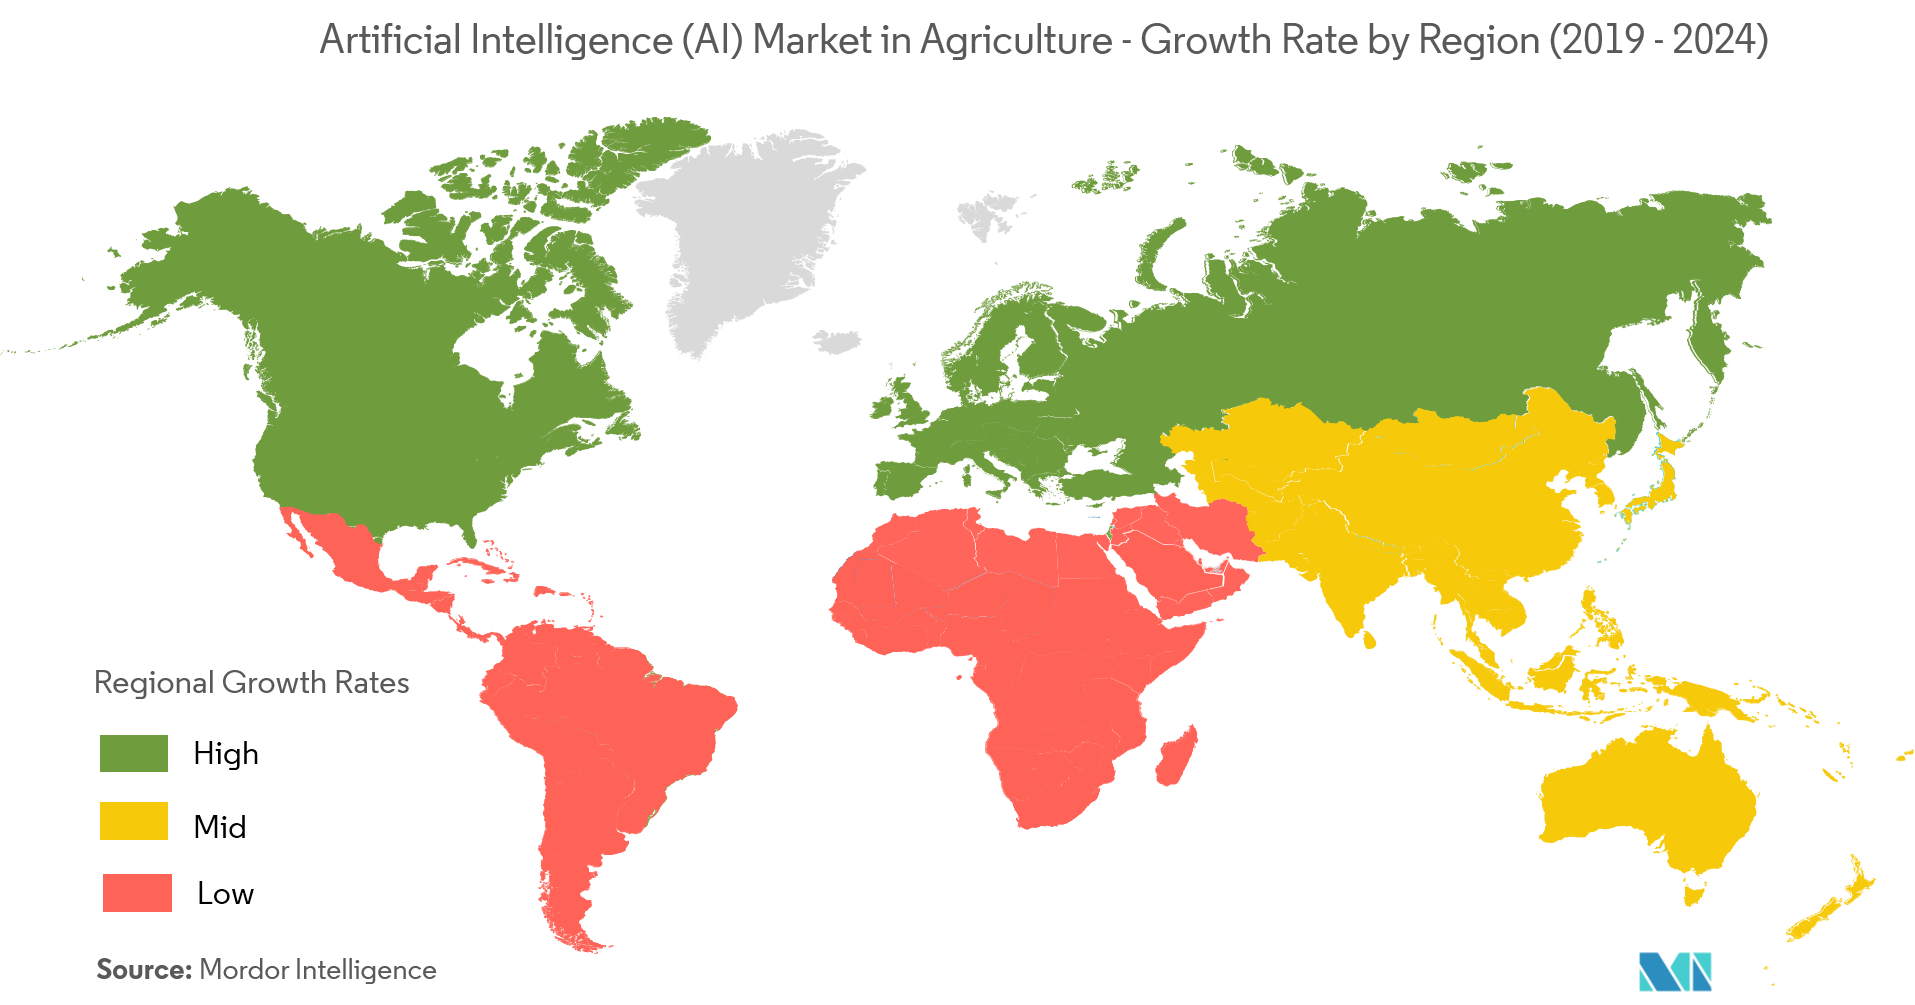 Artificial Intelligence in Agriculture Market Growth Rate